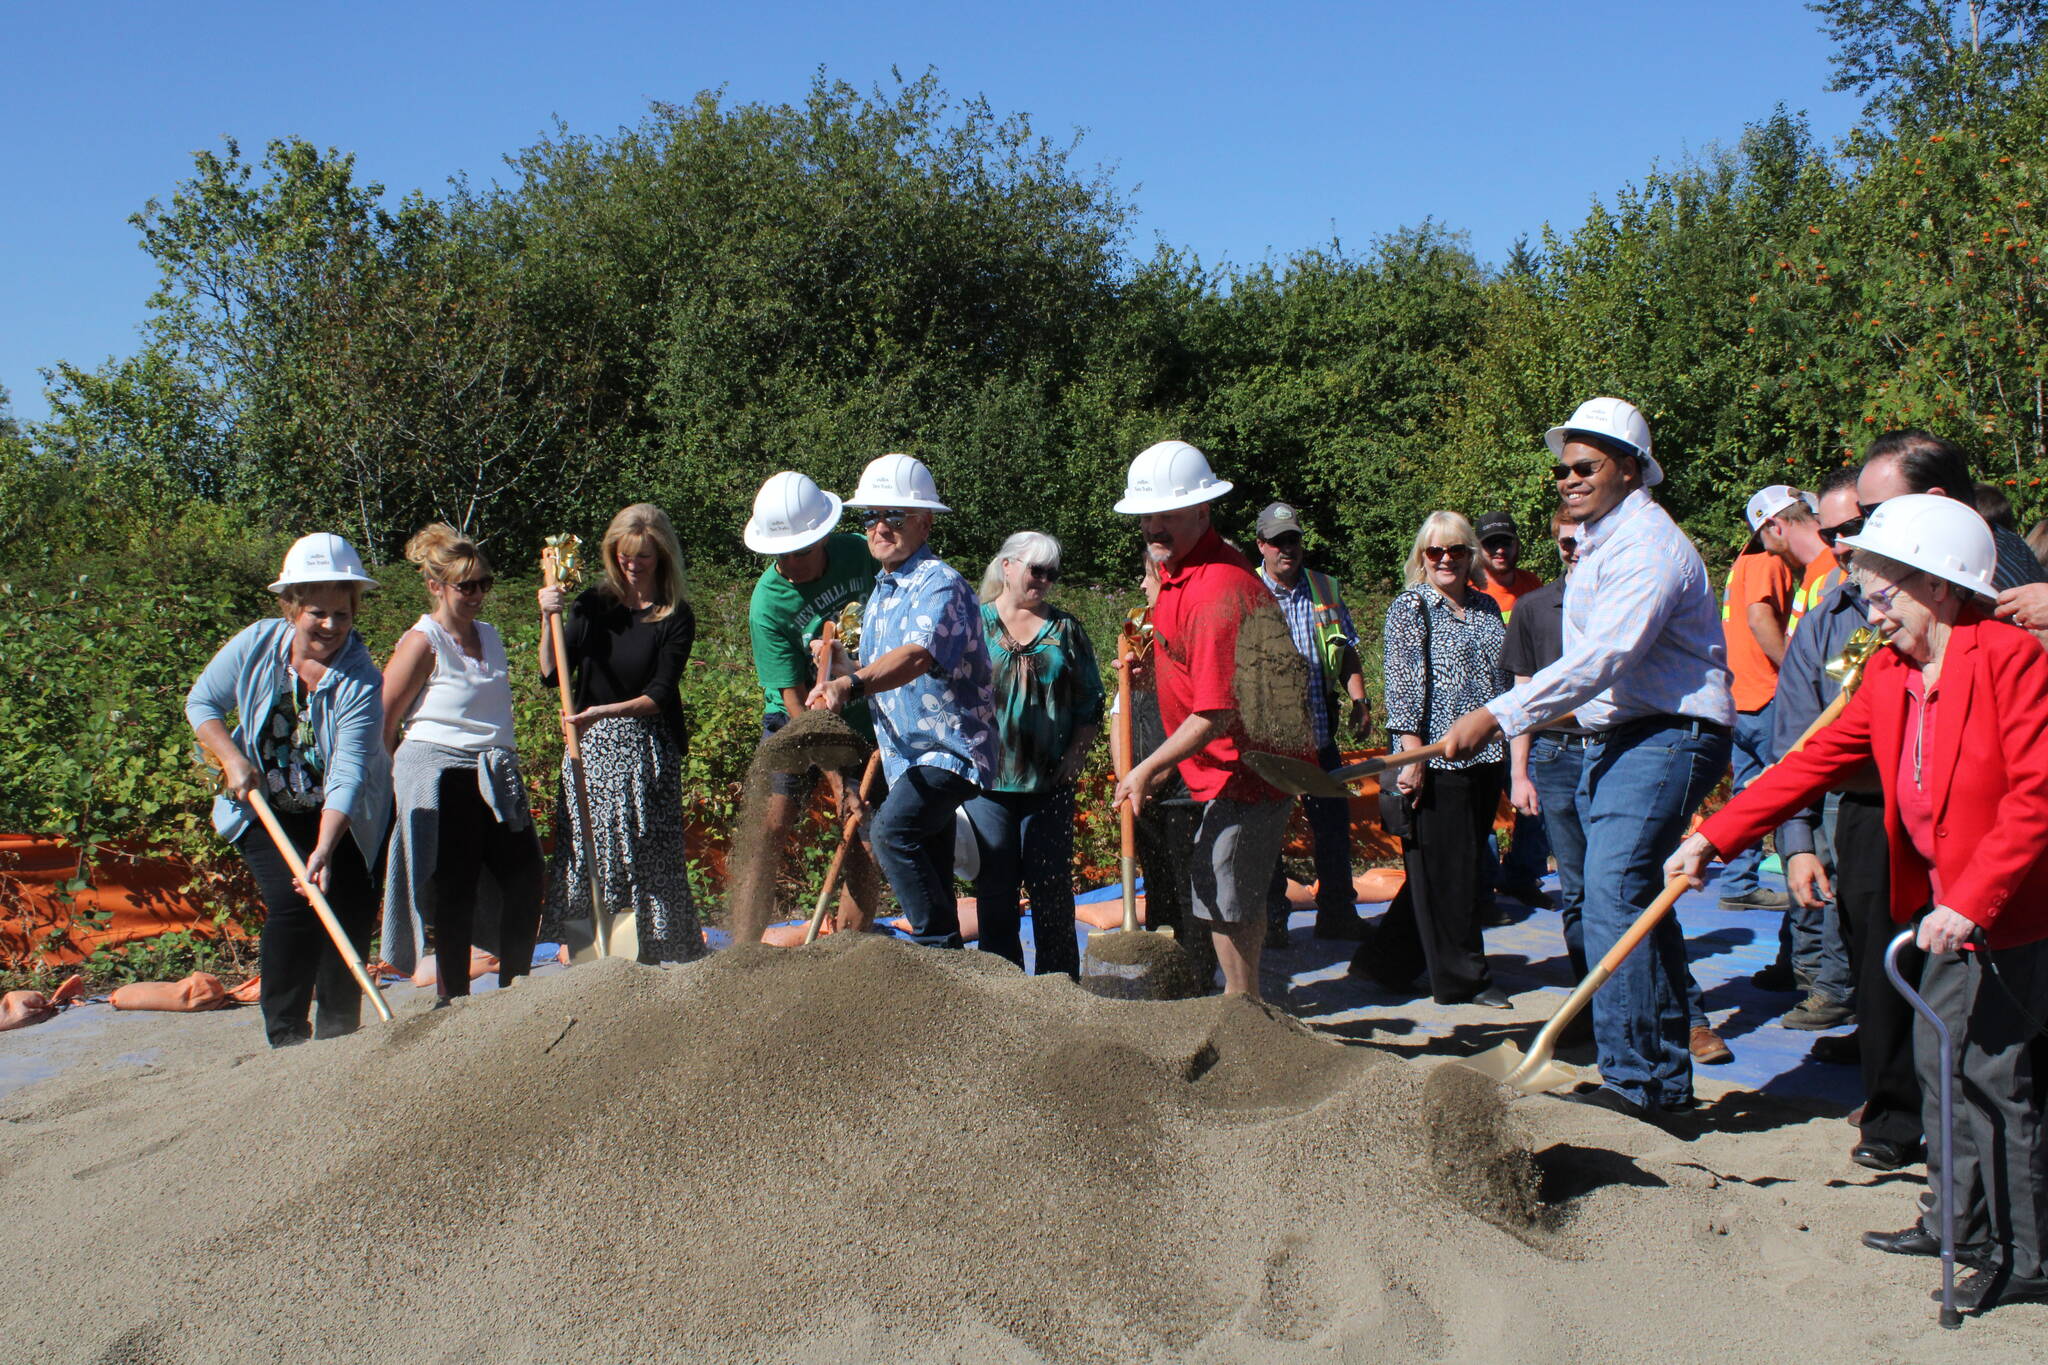 Photo By Joshua Solorzano/Sound Publishing
Black Diamond employees participating in a ceremonial groundbreaking at the location where the Lawson Hills Fire Station is set to be.